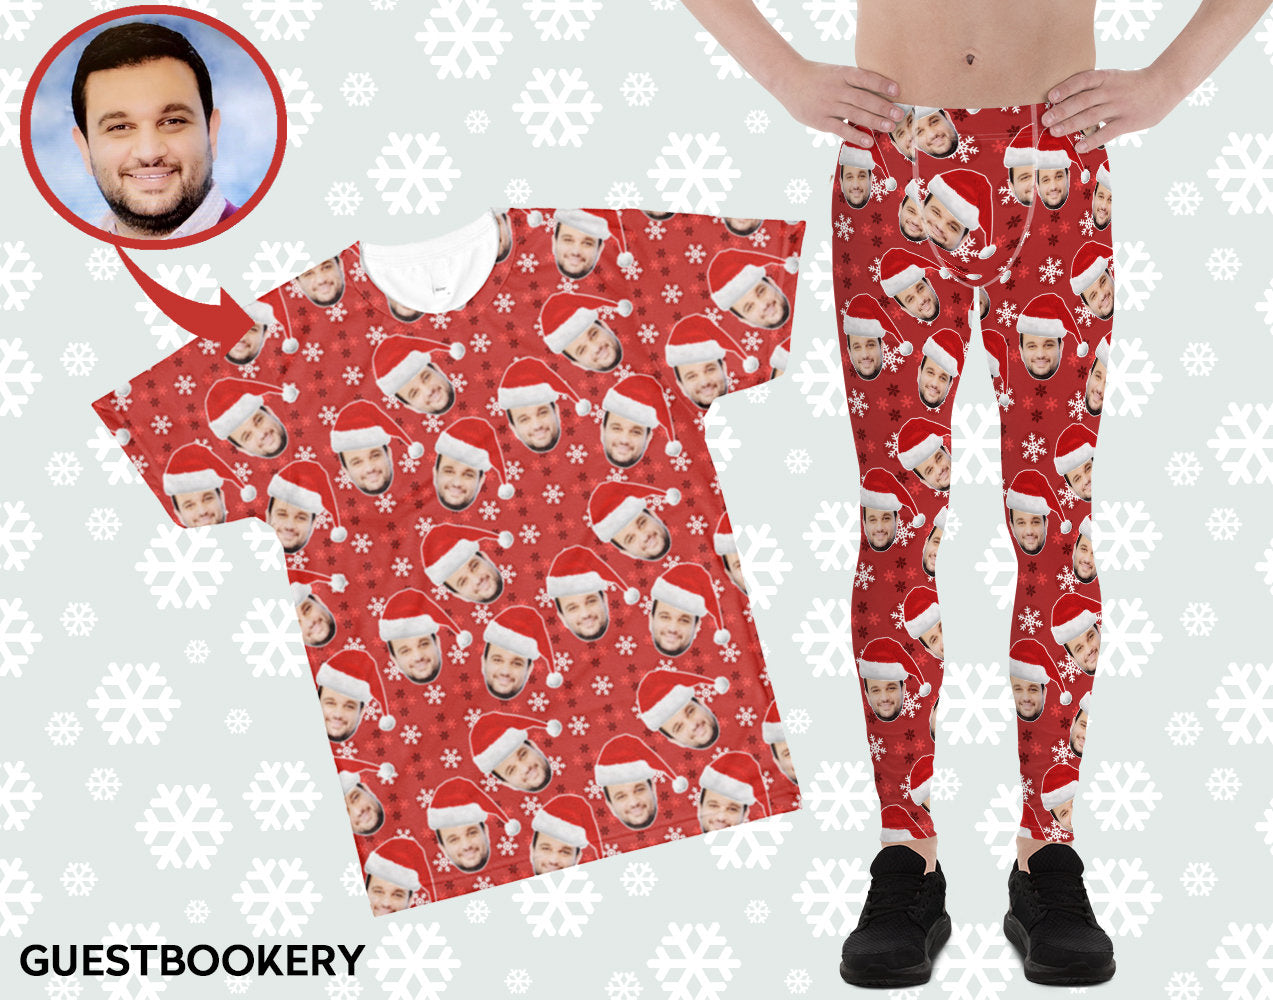 Custom Faces Leggings and Shirt CHRISTMAS SET - MALE - Red Snowflakes Pattern